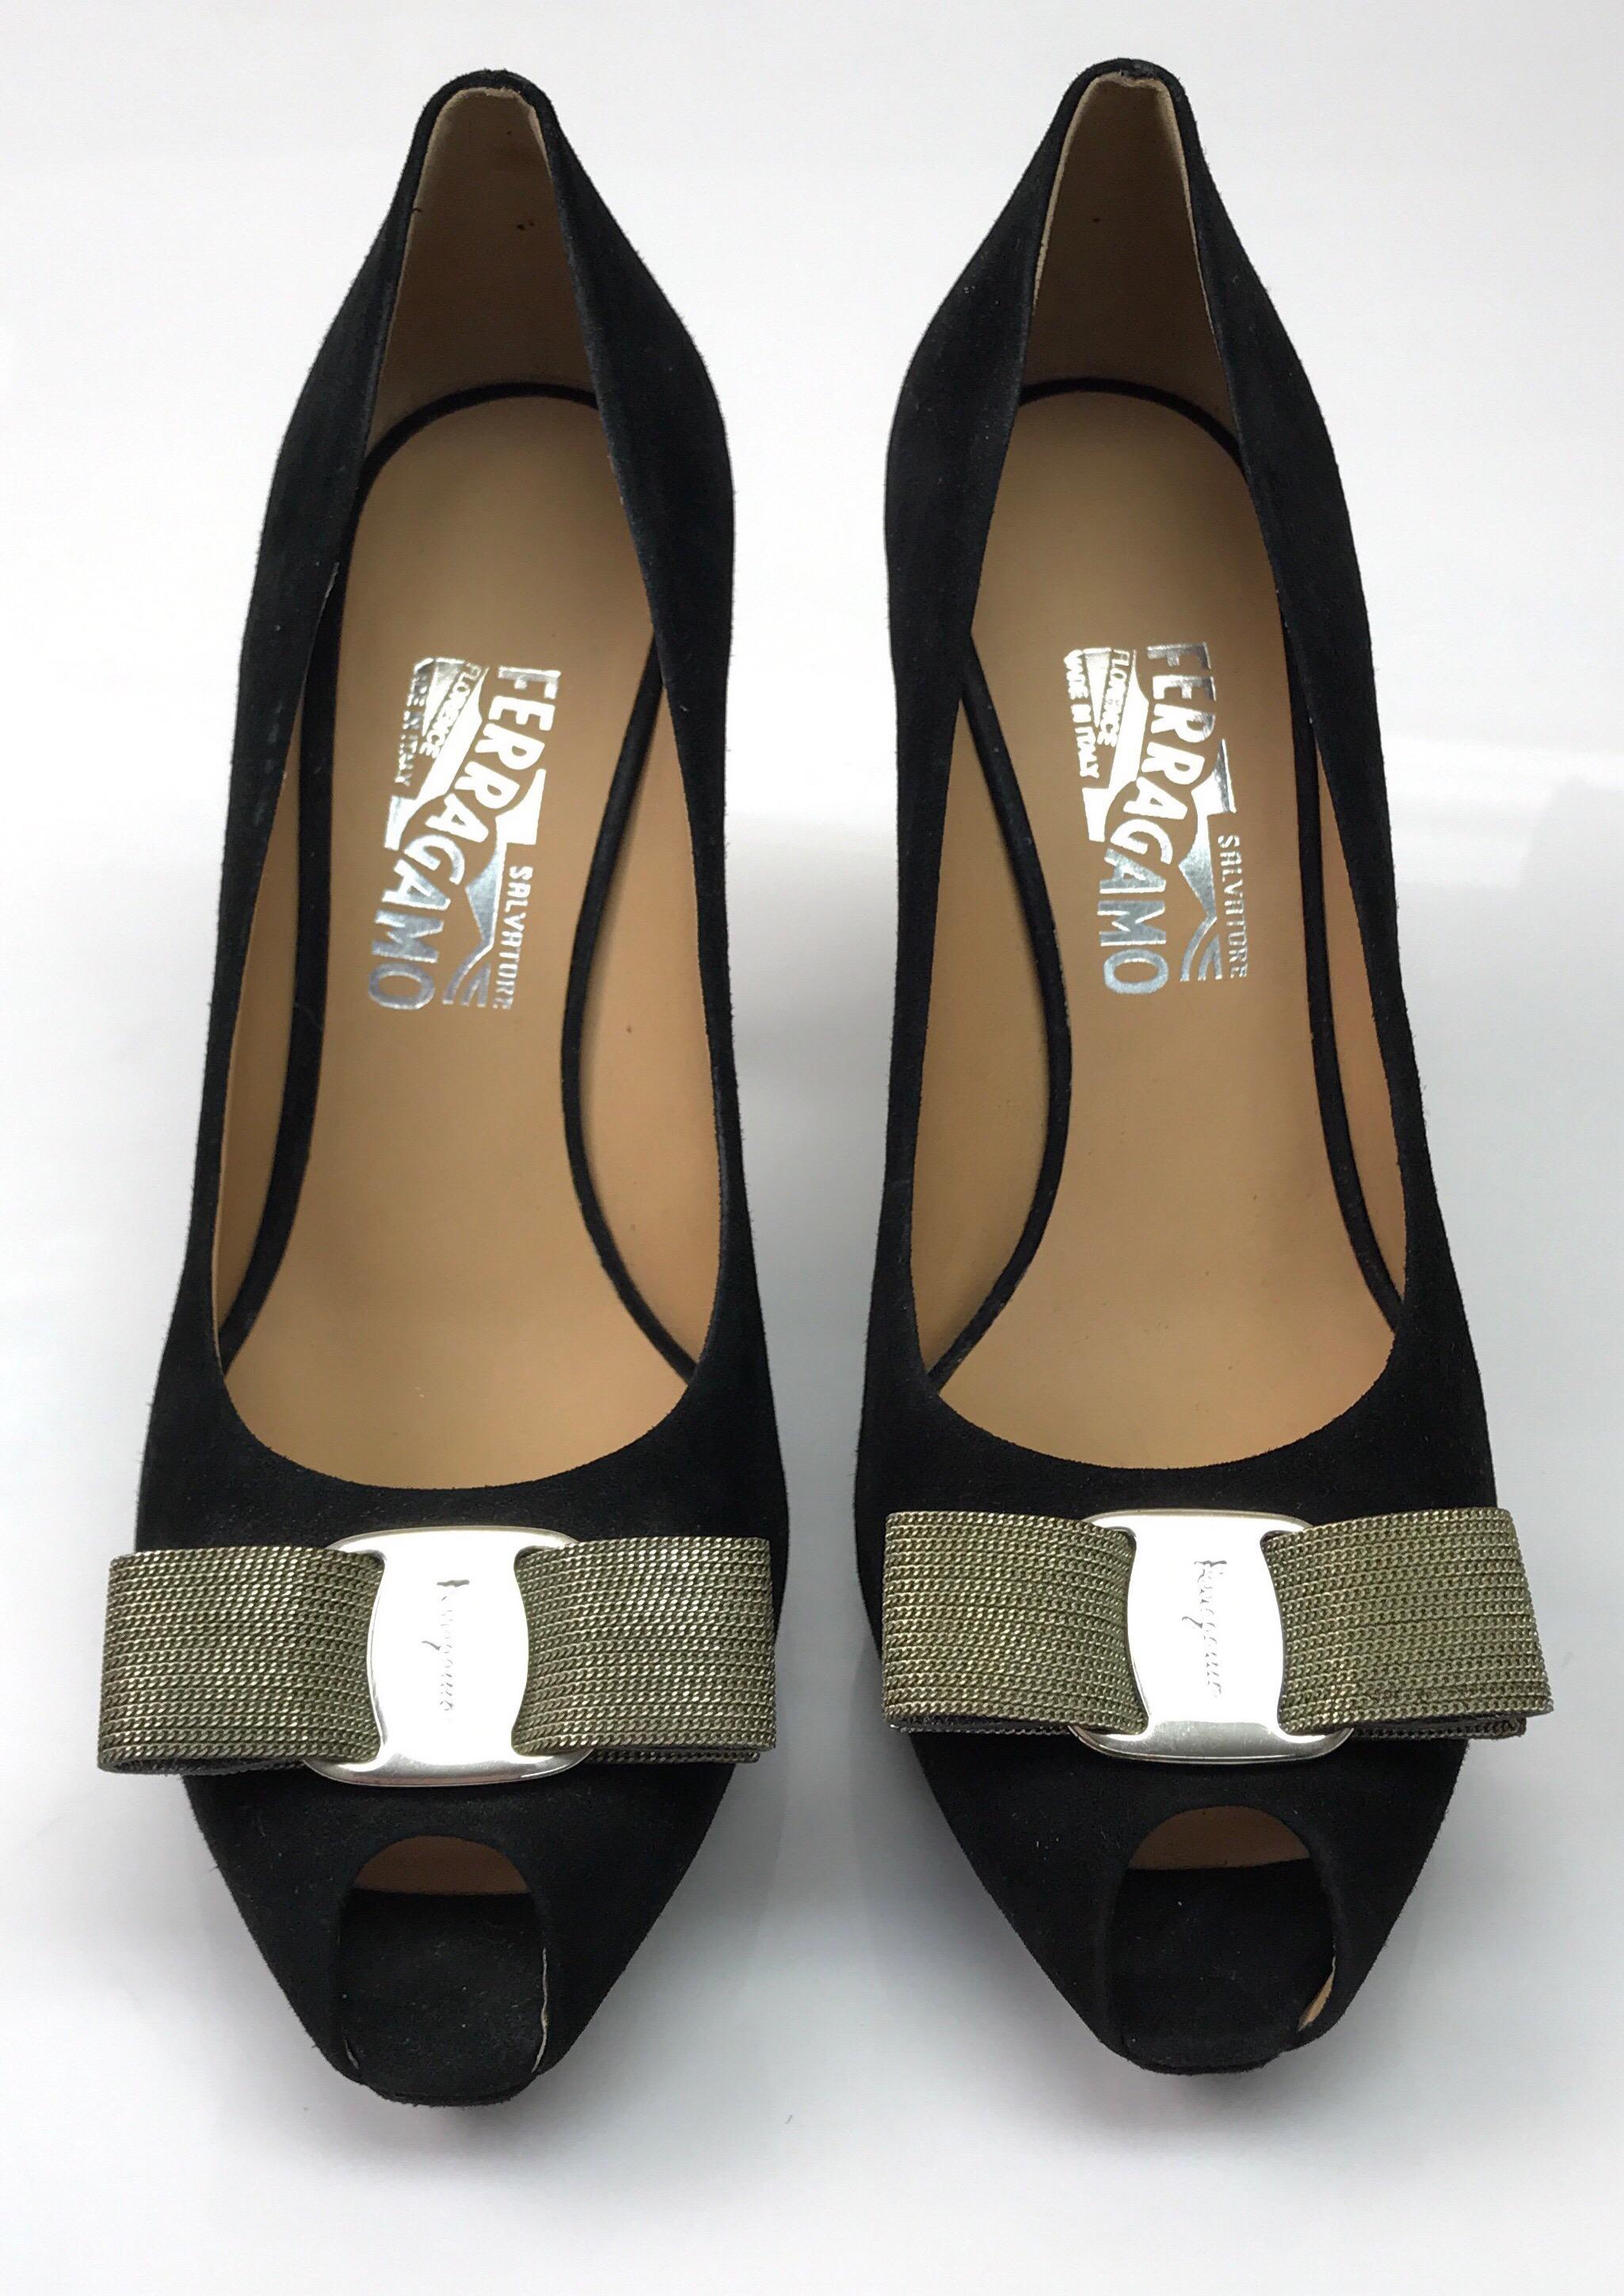 Salvatore Ferragamo Black Suede w/ Silver Chain Bow Pump - 9. This stunning Salvatore Ferragamo pump is in excellent condition. There is no sign of use. It is made of a black suede material and has a peep toe. There is a bow on the front made out of